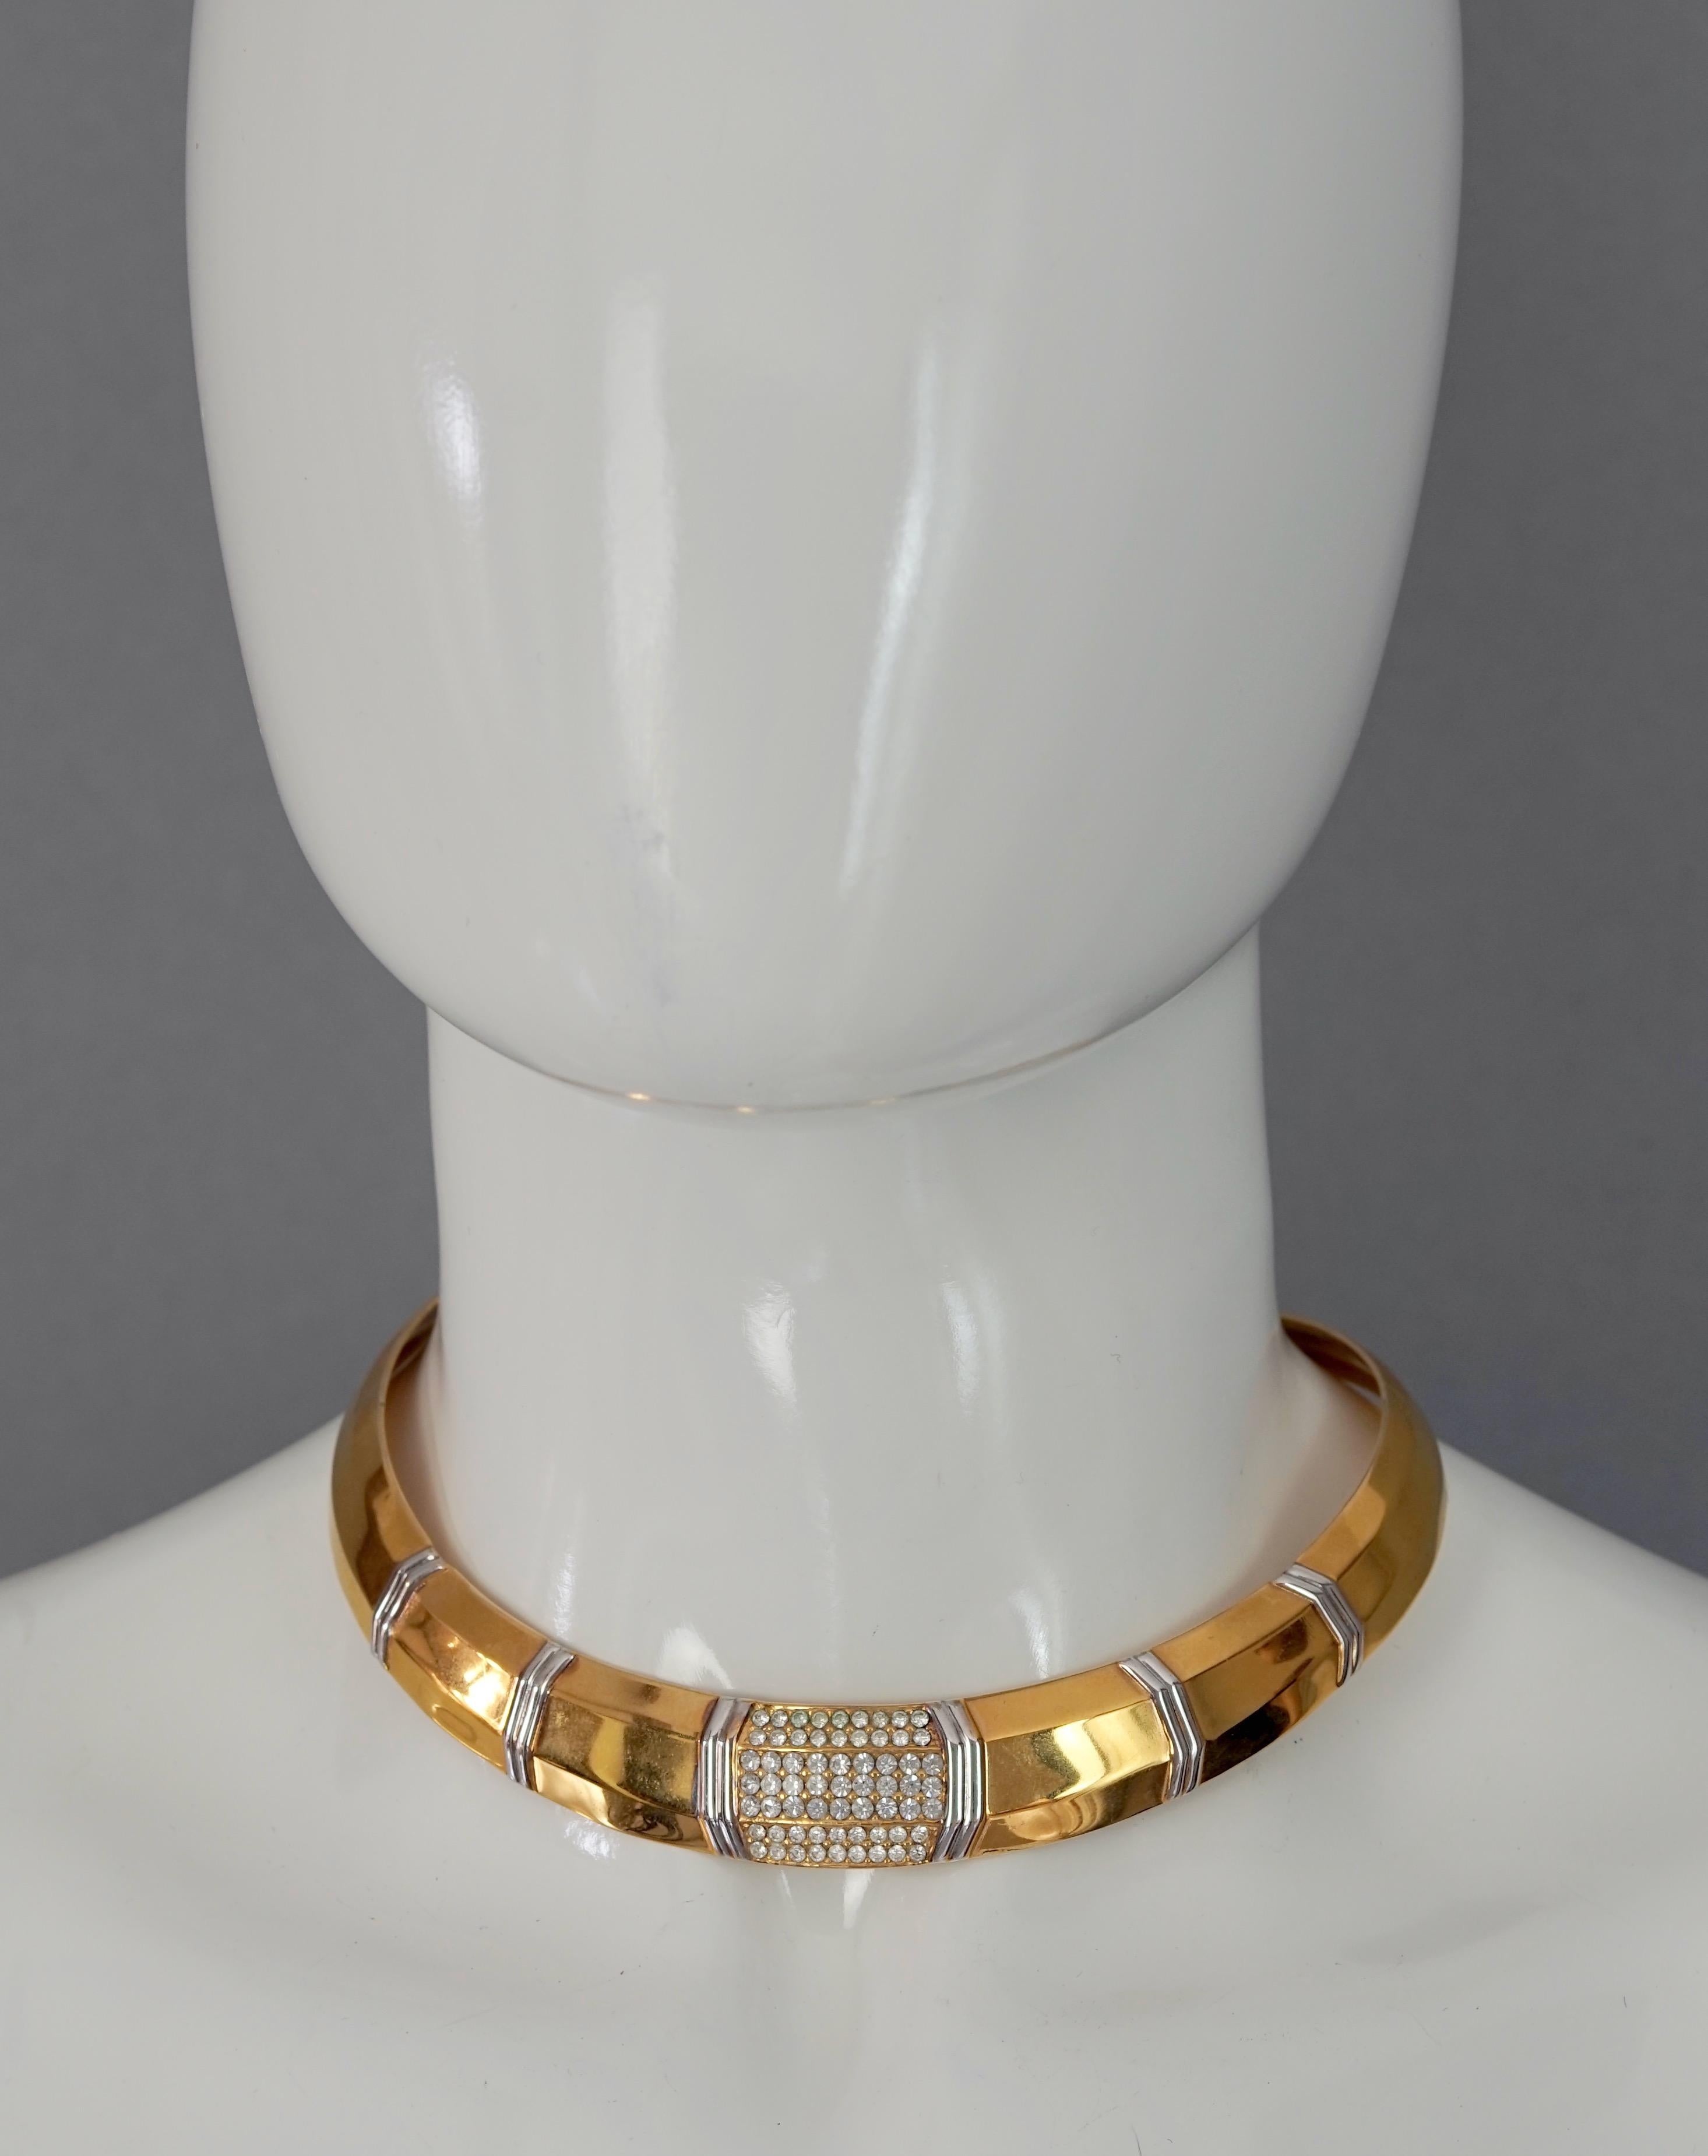 Vintage LANVIN Art Deco Rhinestone Rigid Choker Necklace

Measurements:
Height: 0.70 inch (1.8 cm)
Inner Circumference: 15.15 inches (38.5 cm) opening included

Features:
- 100% Authentic LANVIN.
- Gilt rigid choker with rhinestone accents at the